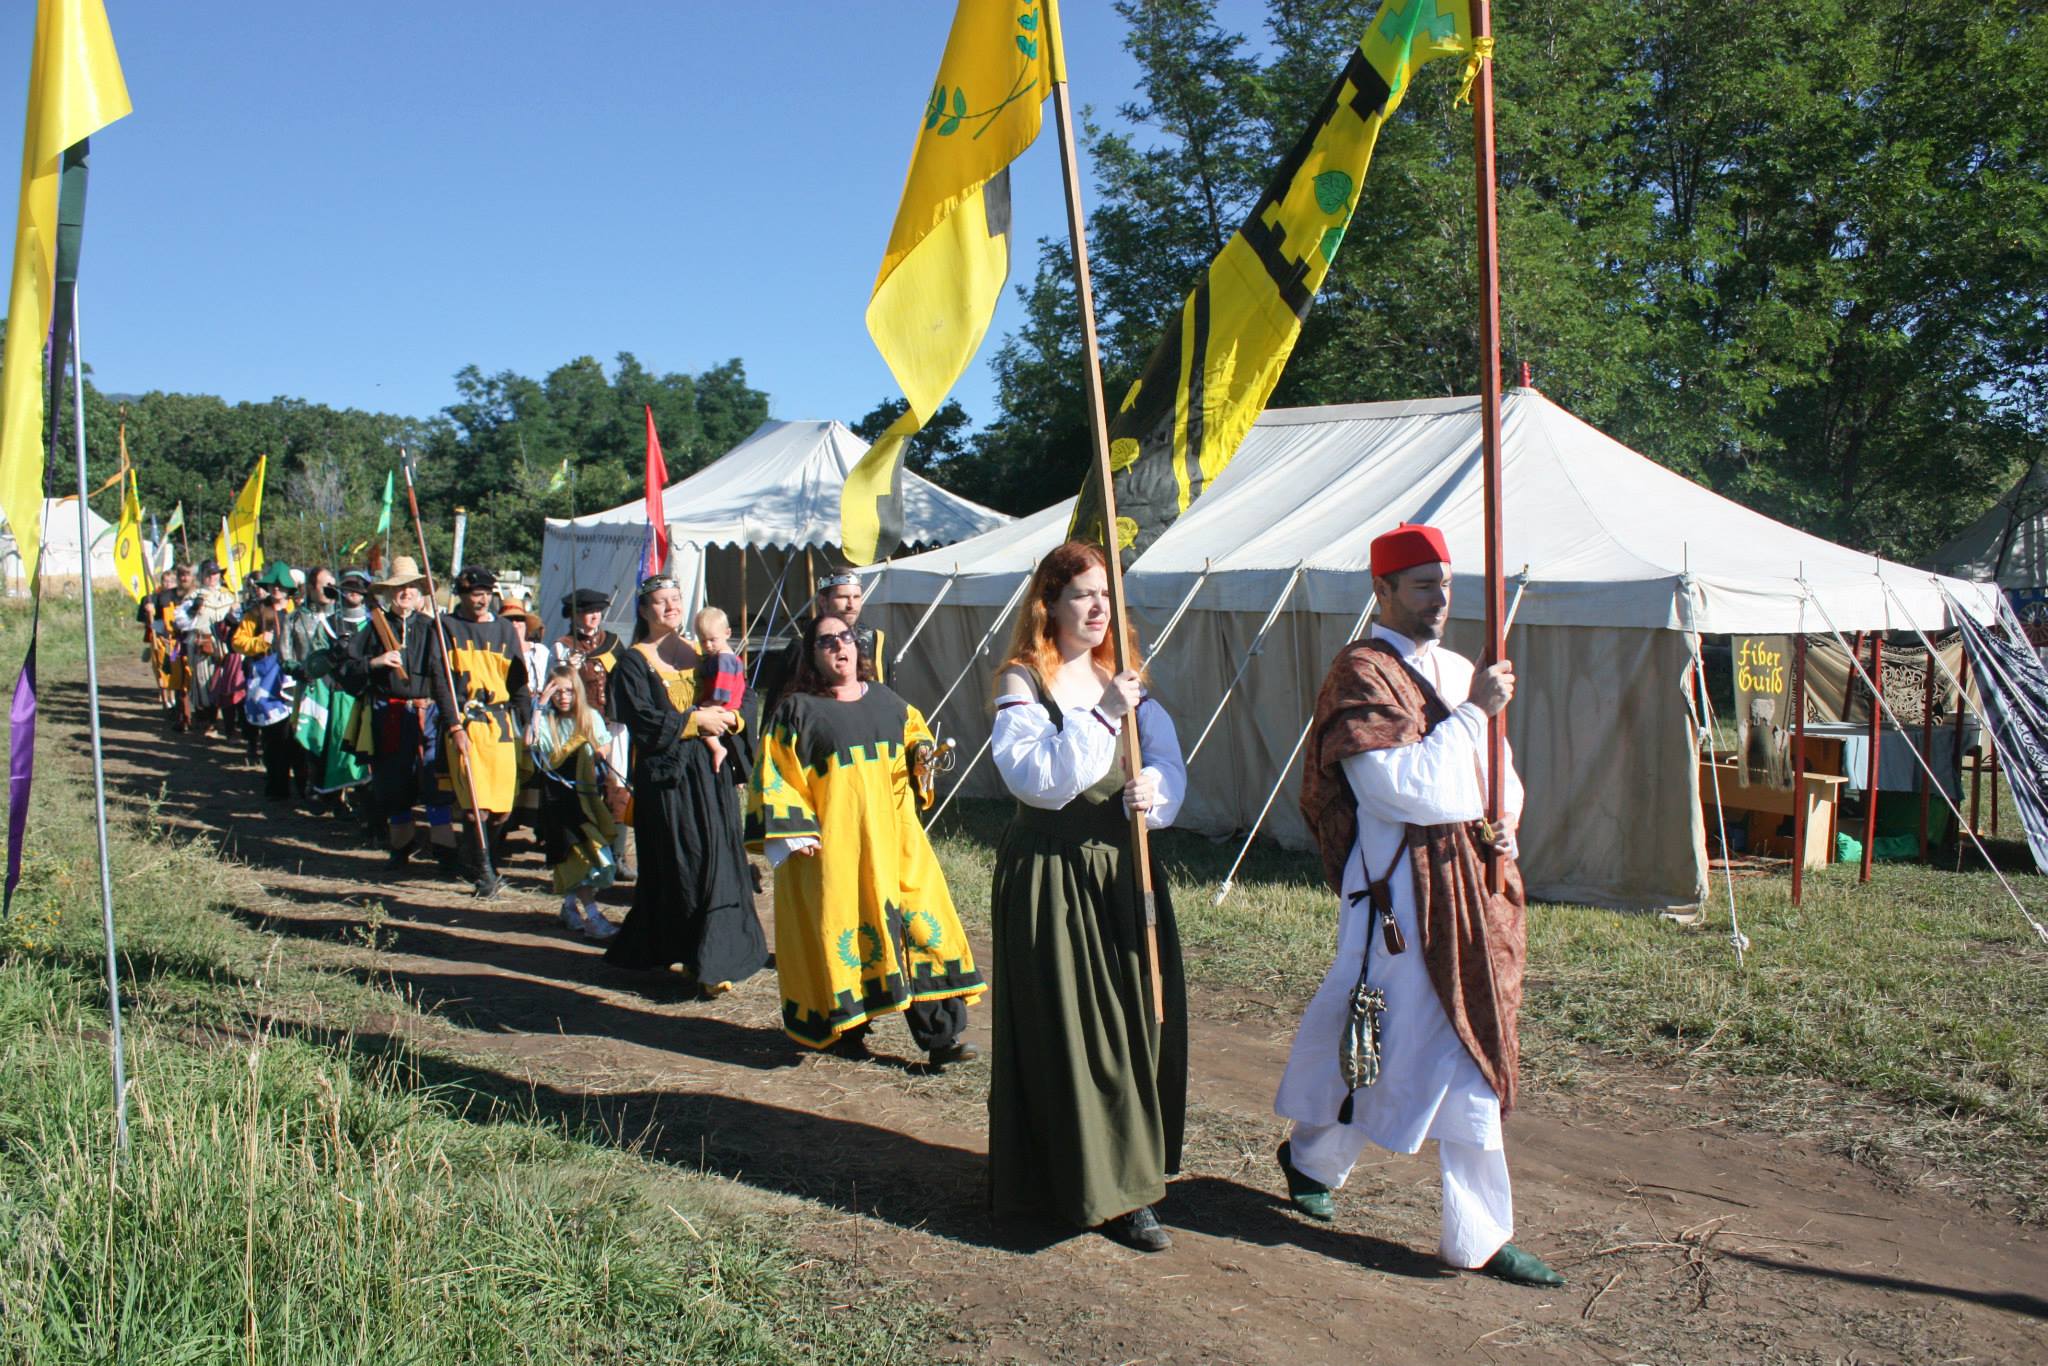 A procession of people with banners in front of a camp